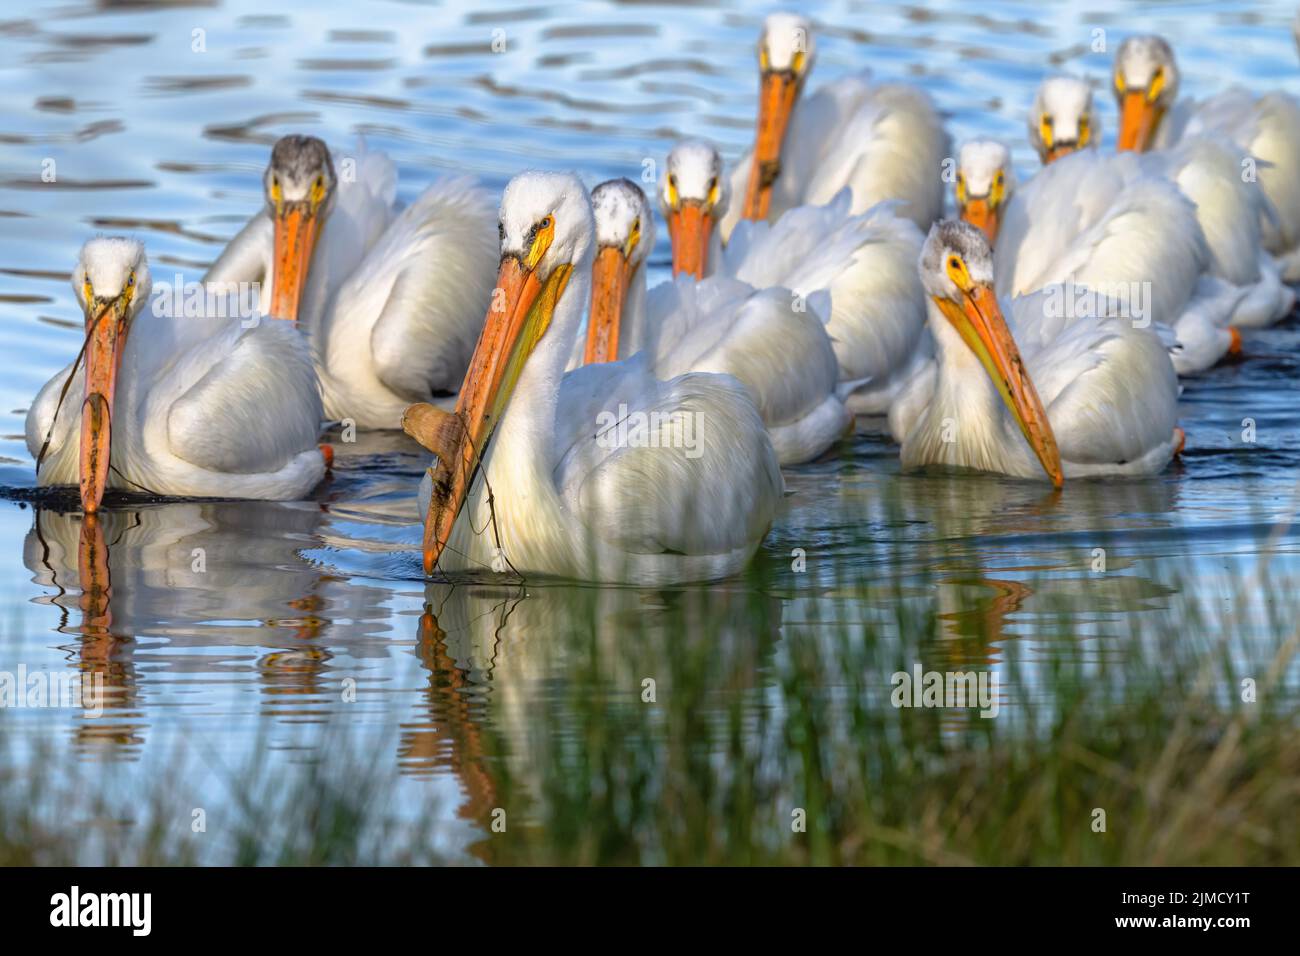 A group of White Pelicans following their leader approach the shoreline of the lake. Stock Photo